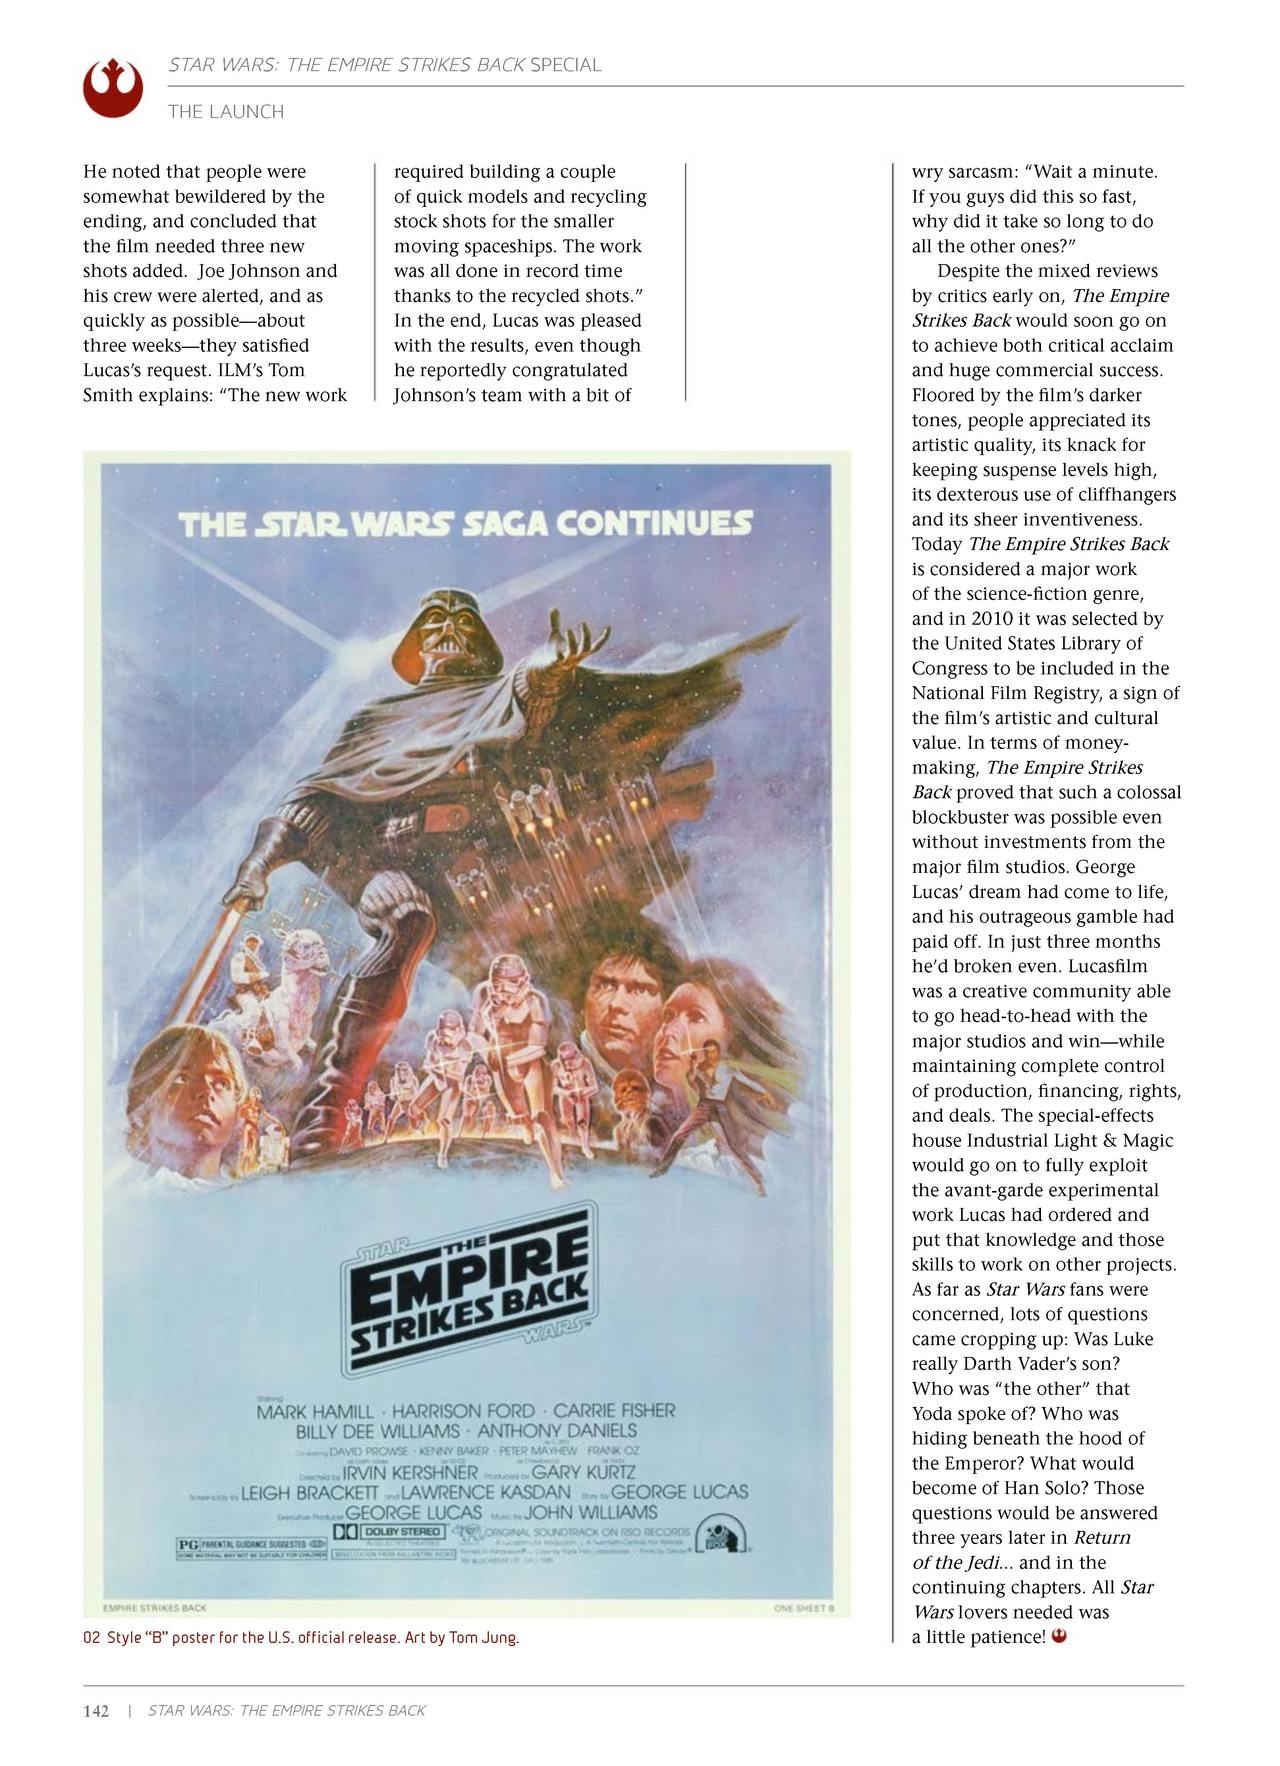 Star Wars - The Empire Strikes Back - The 40th Anniversary Special Edition 143